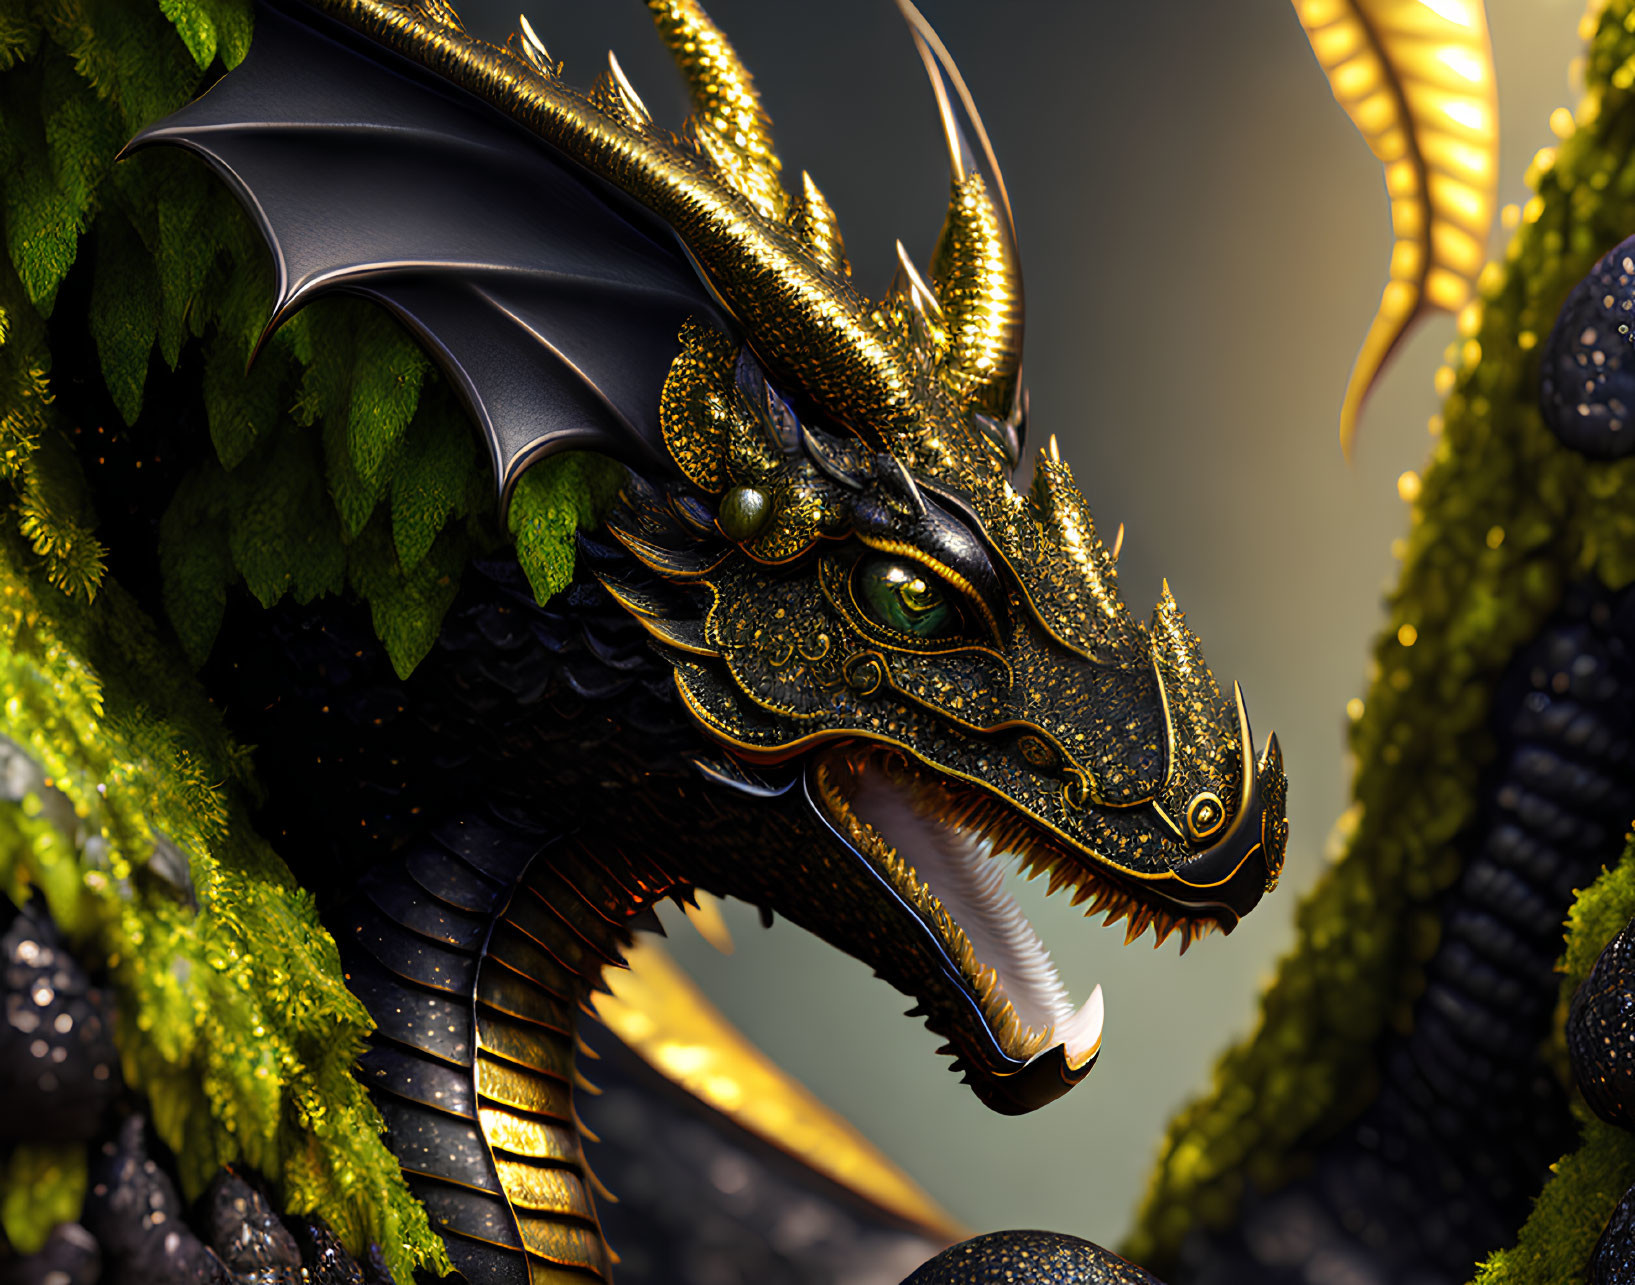 Detailed close-up of majestic black and gold dragon with intricate scales and horns, set in lush vegetation.